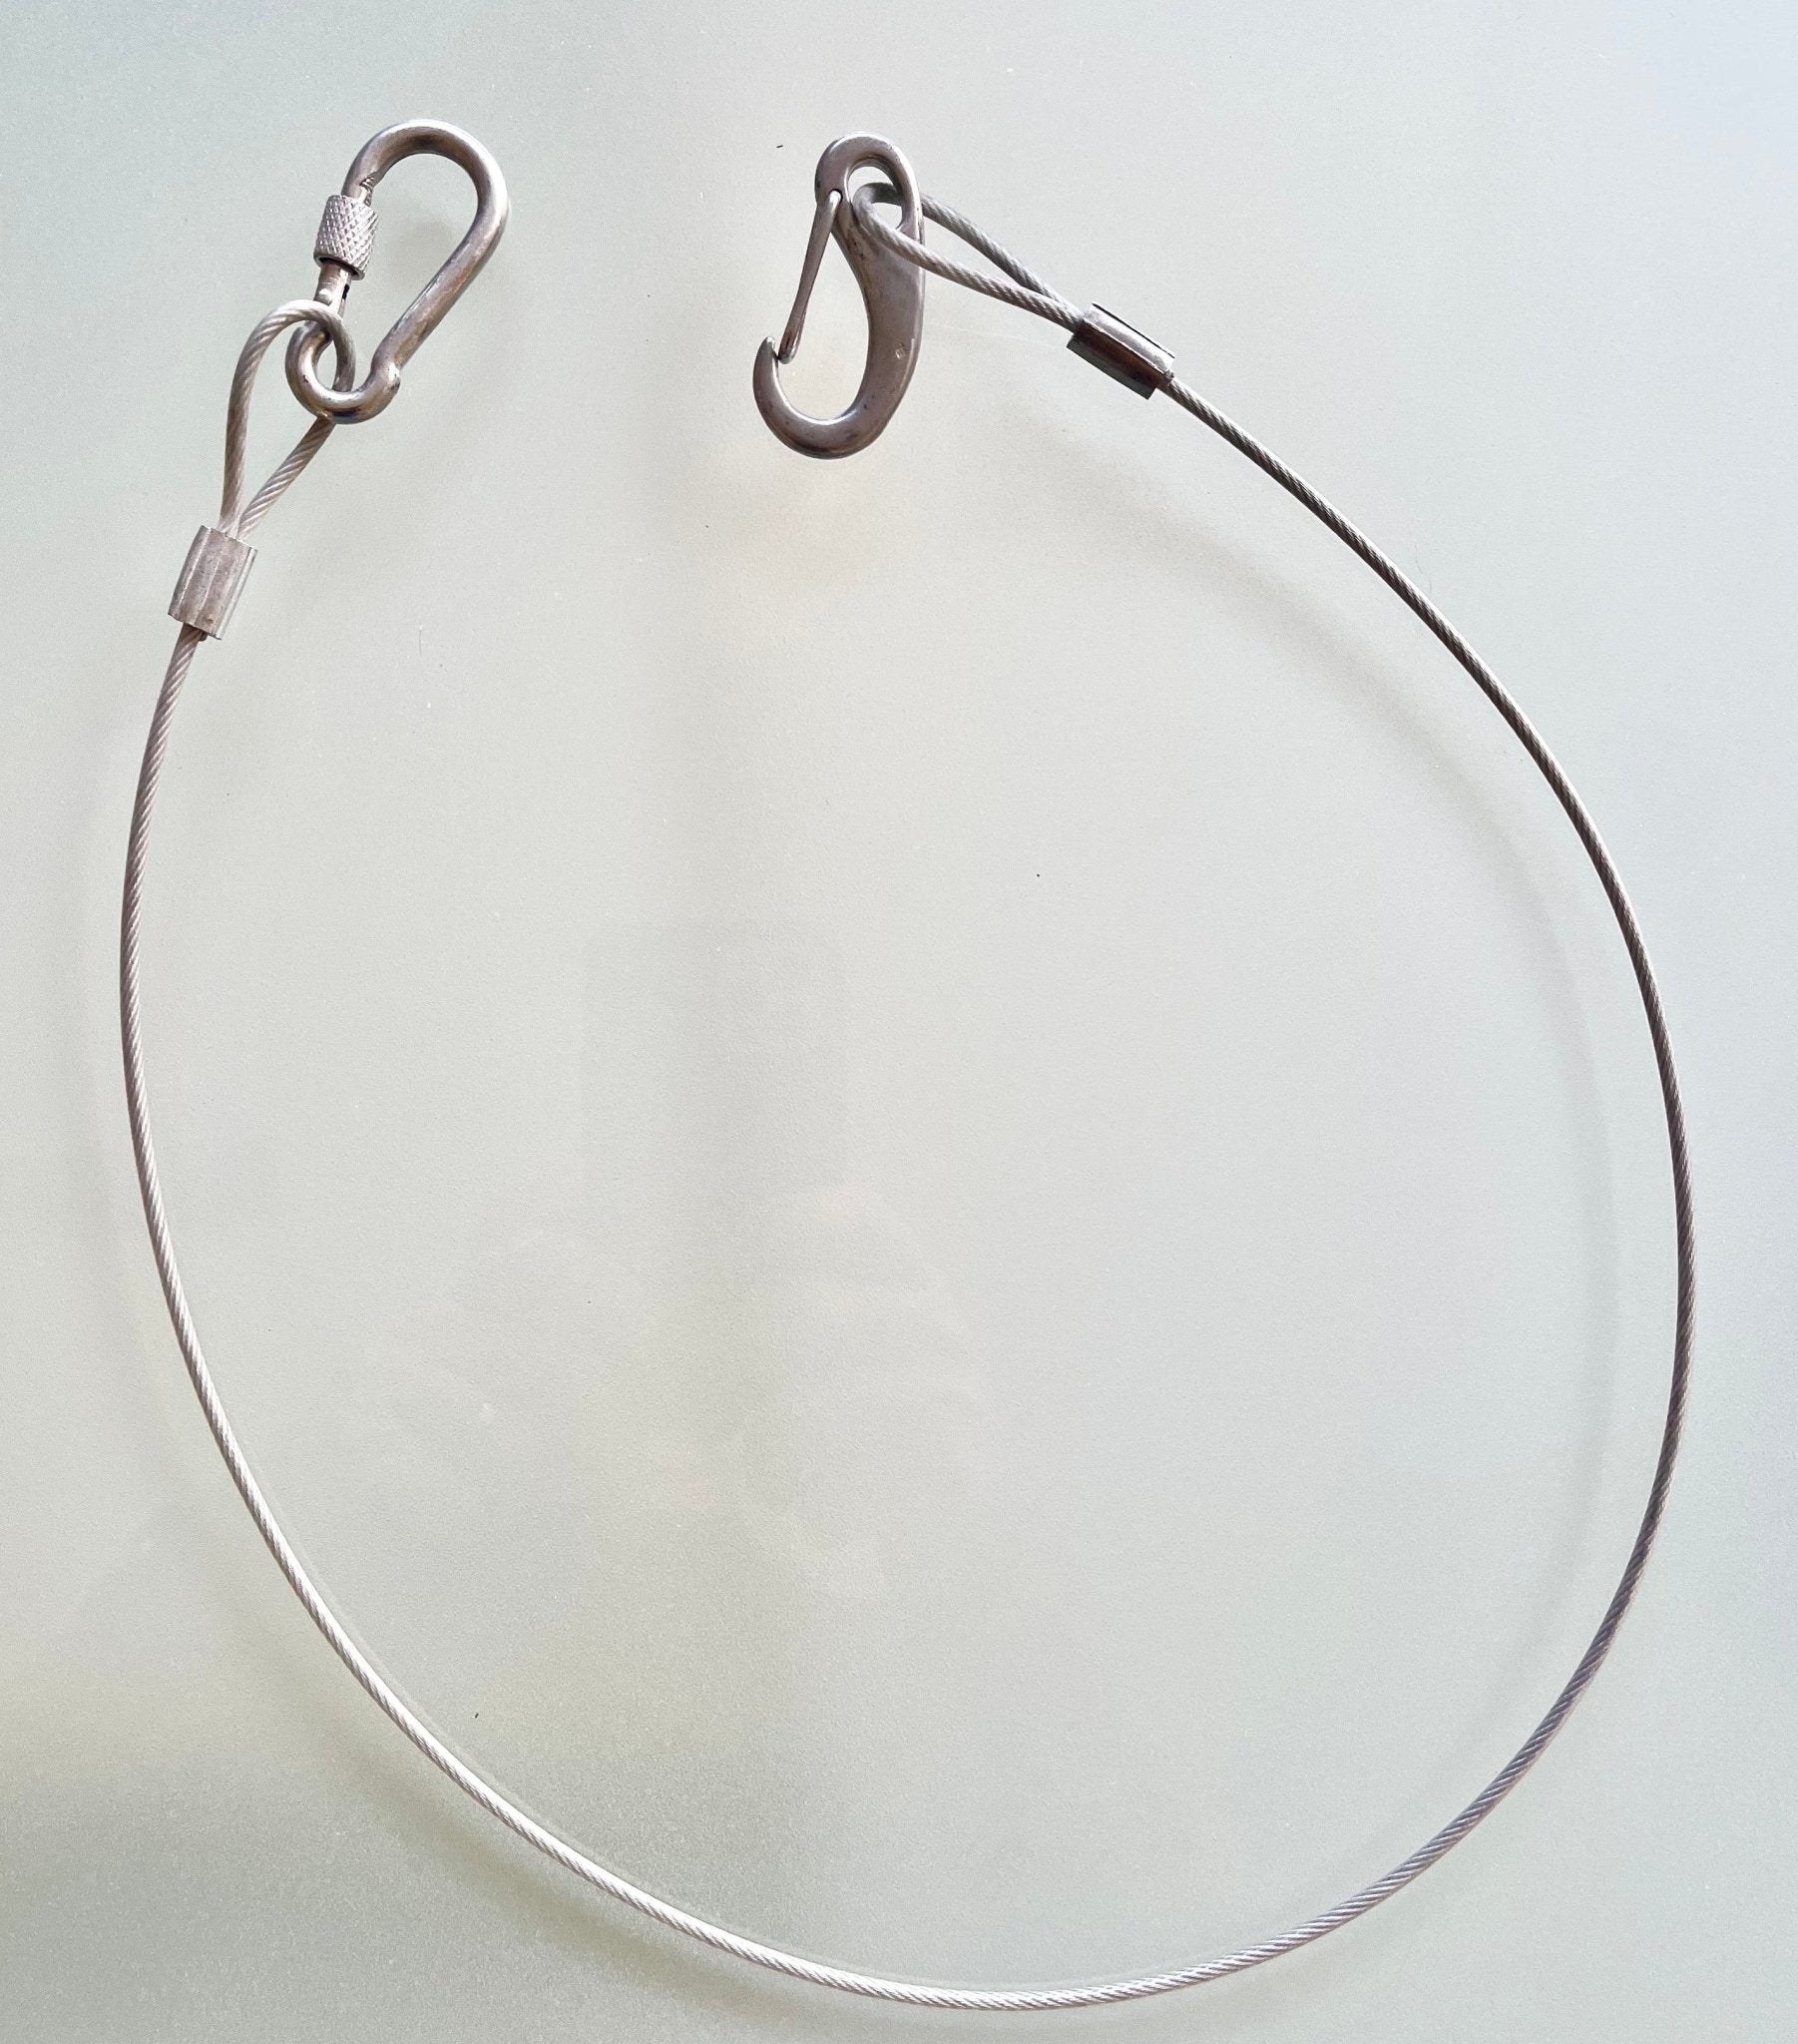 Stainless Fishing Gear Tether - Jetcast